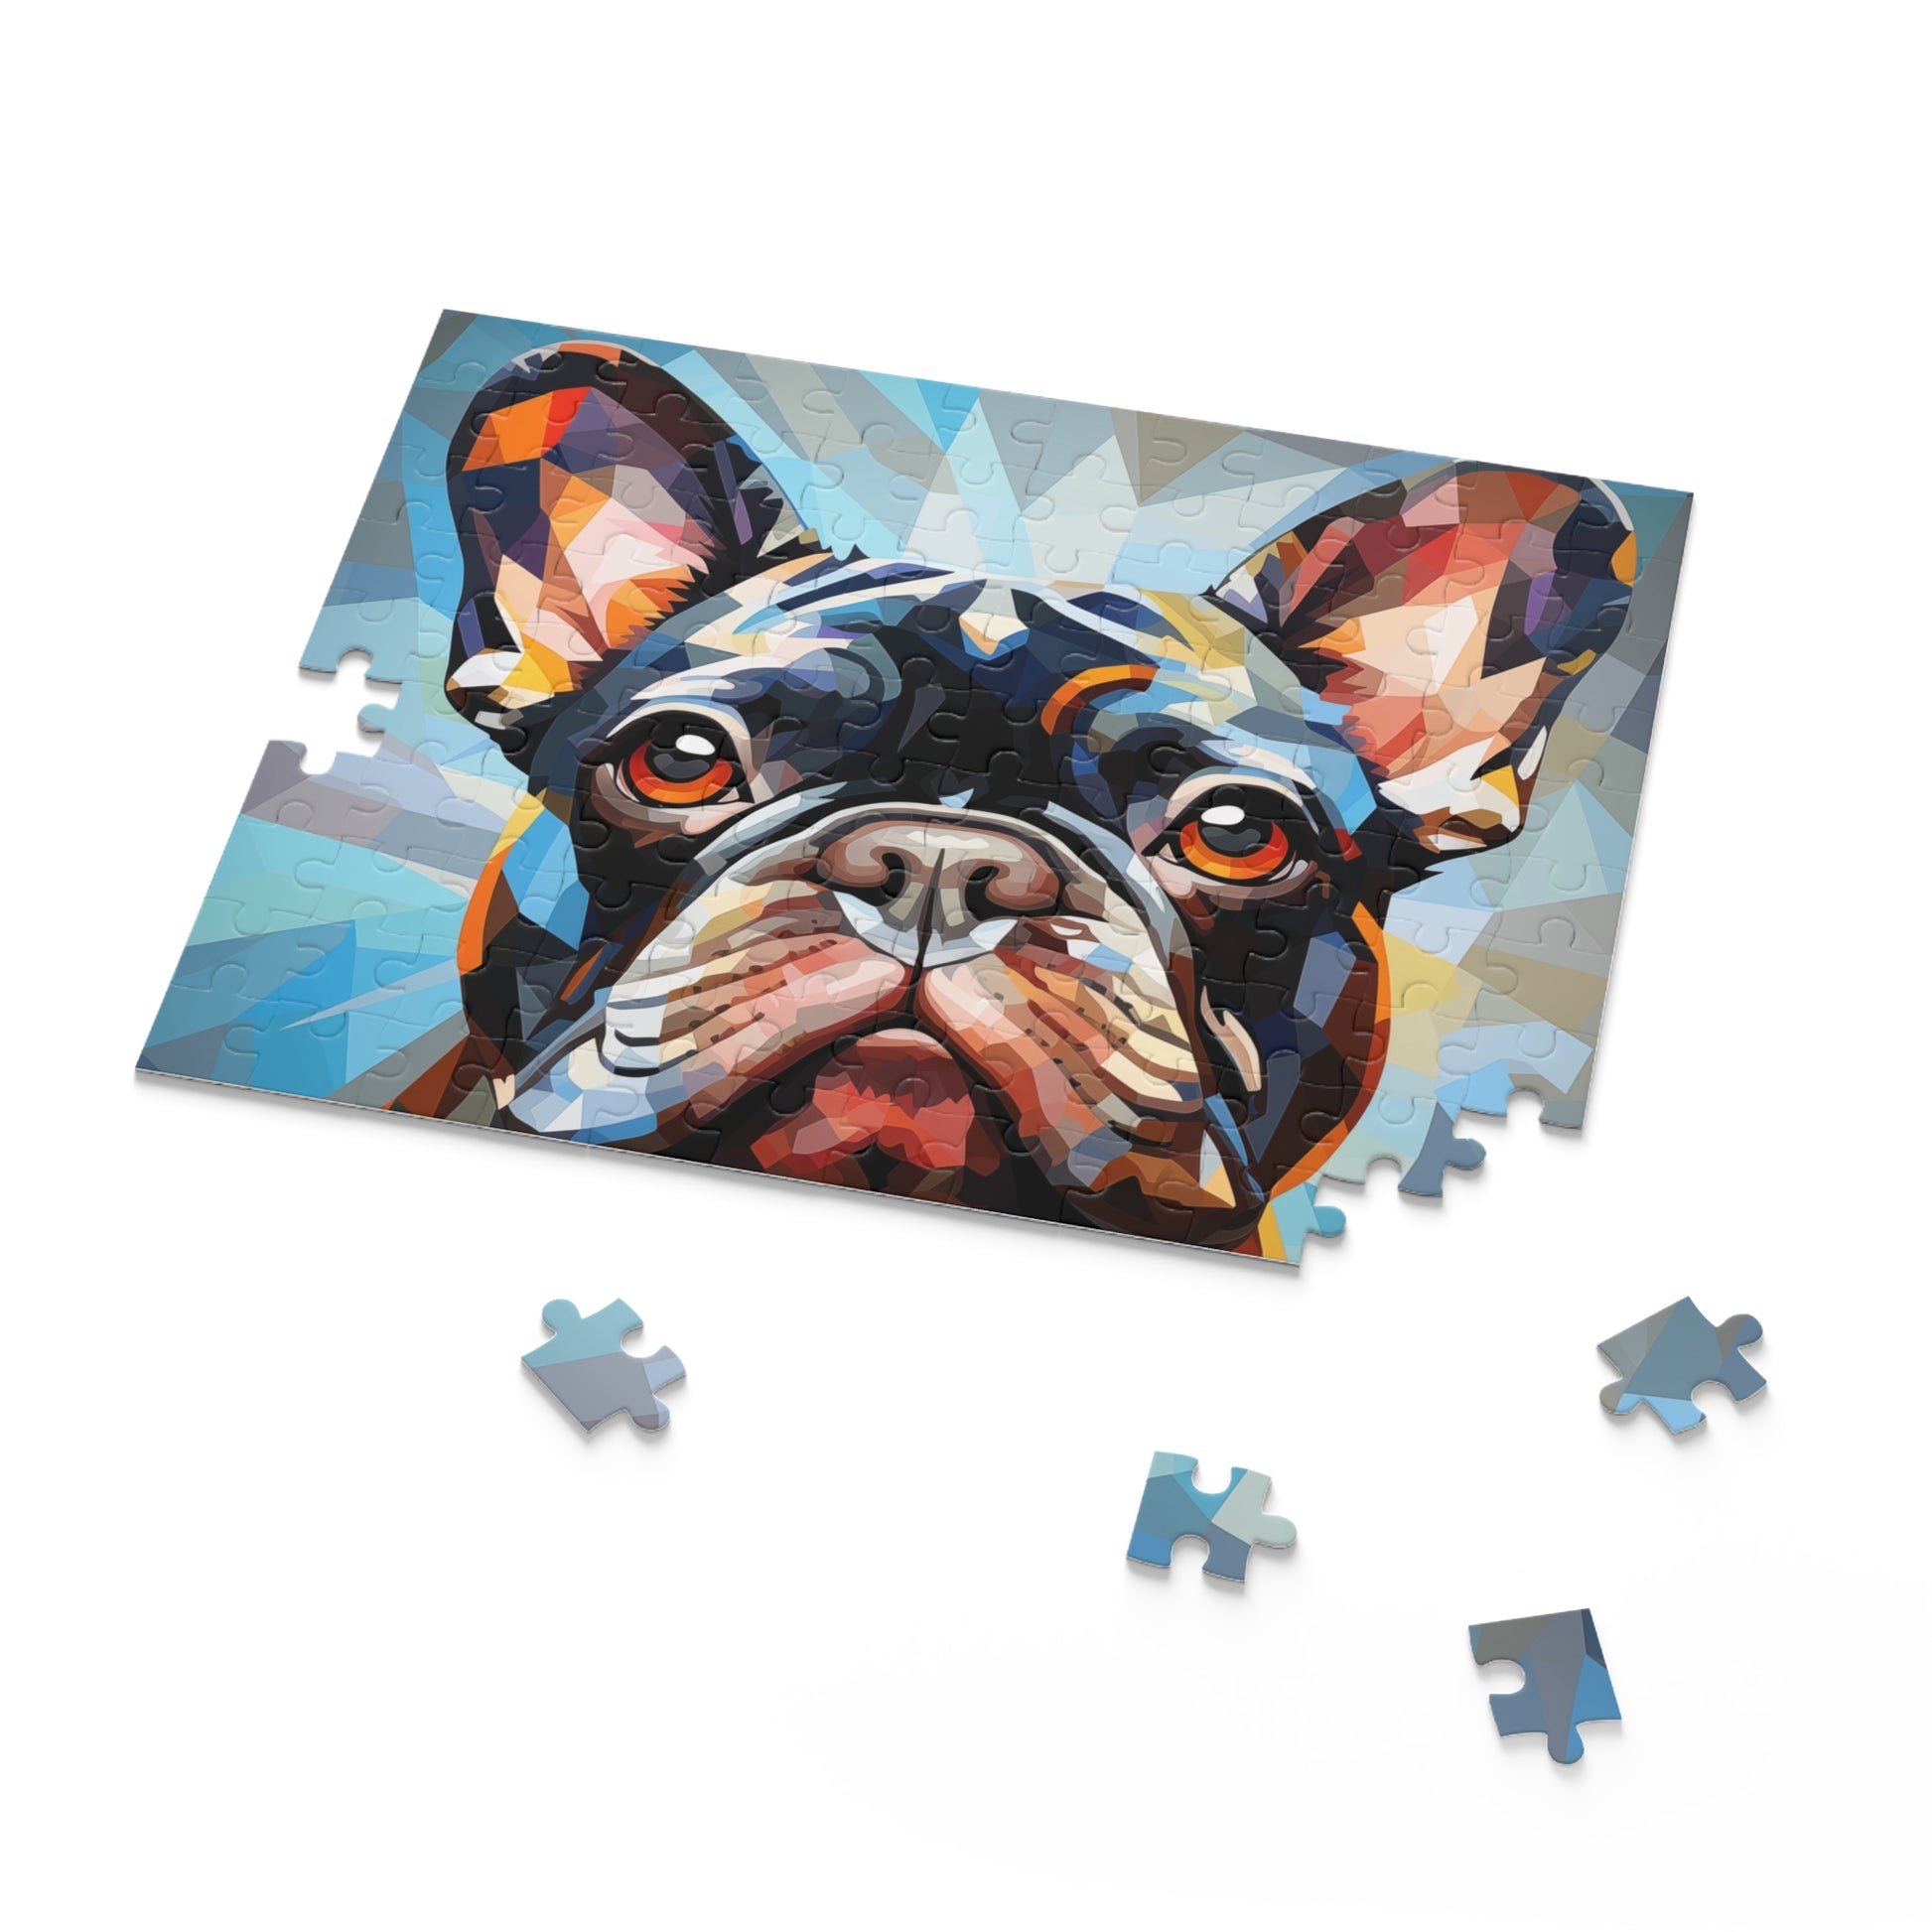 Frenchie Vibrant Abstract Jigsaw Dog Puzzle Oil Paint Adult Birthday Business Jigsaw Puzzle Gift for Him Funny Humorous Indoor Outdoor Game Gift For Her Online-7